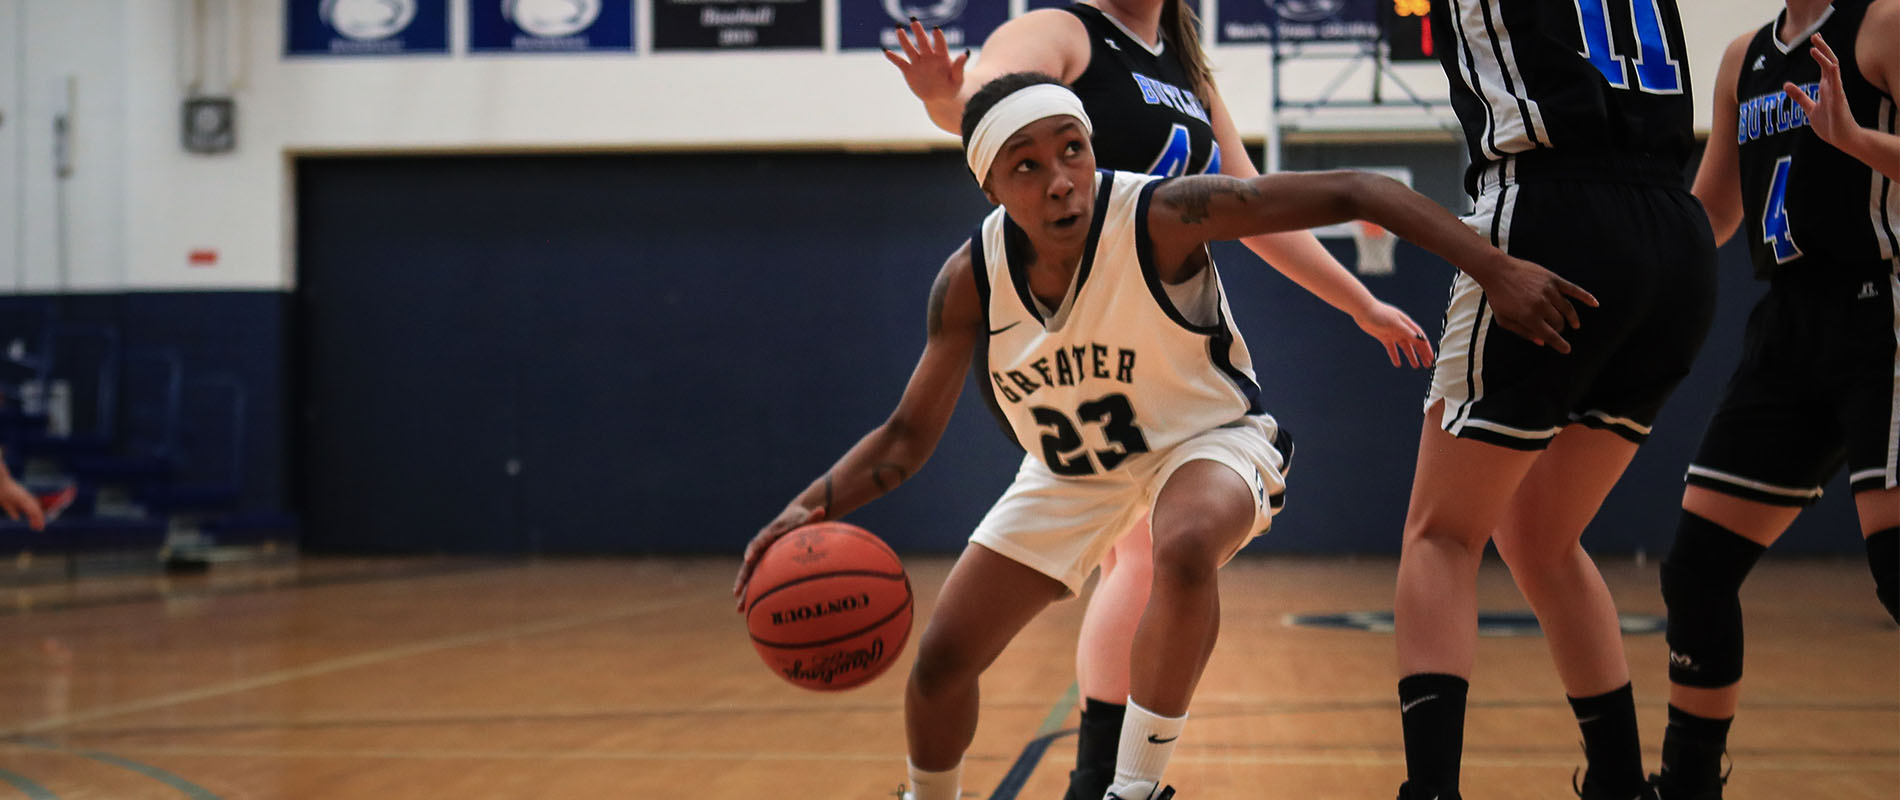 Penn State Greater Allegheny's Teaira Hartley.